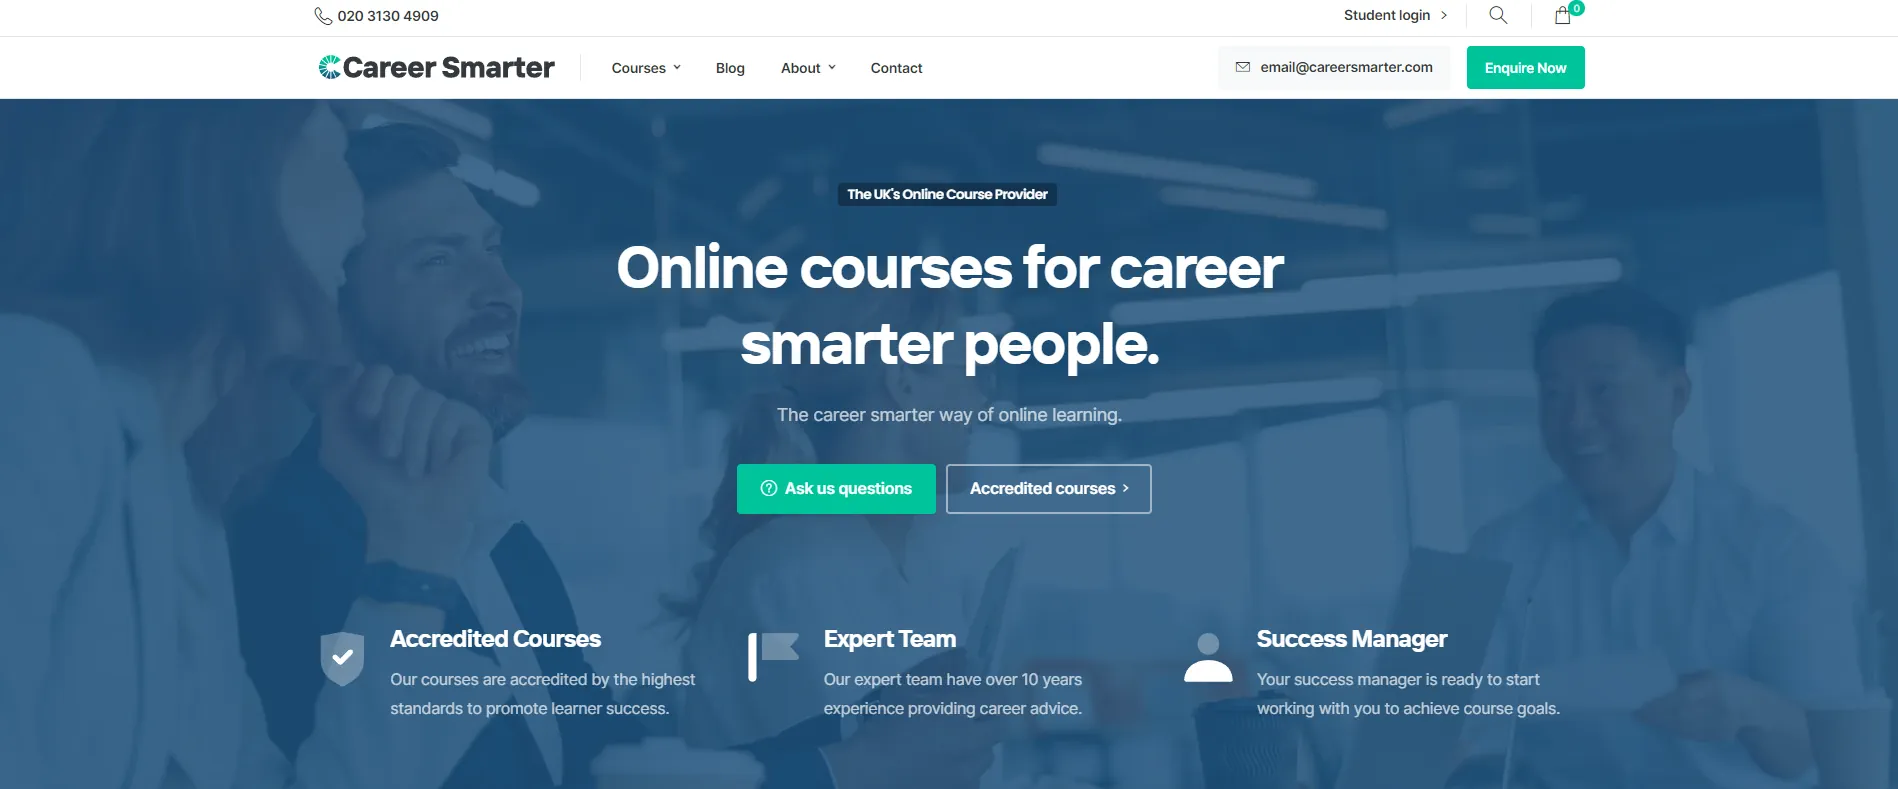 A website homepage for "Career Smarter" advertises online courses. The tagline reads "Online courses for career smarter people." The site highlights "Accredited Courses," an "Expert Team," and a "Success Manager." The top bar features contact information and login options. Choose Career Smarter today!